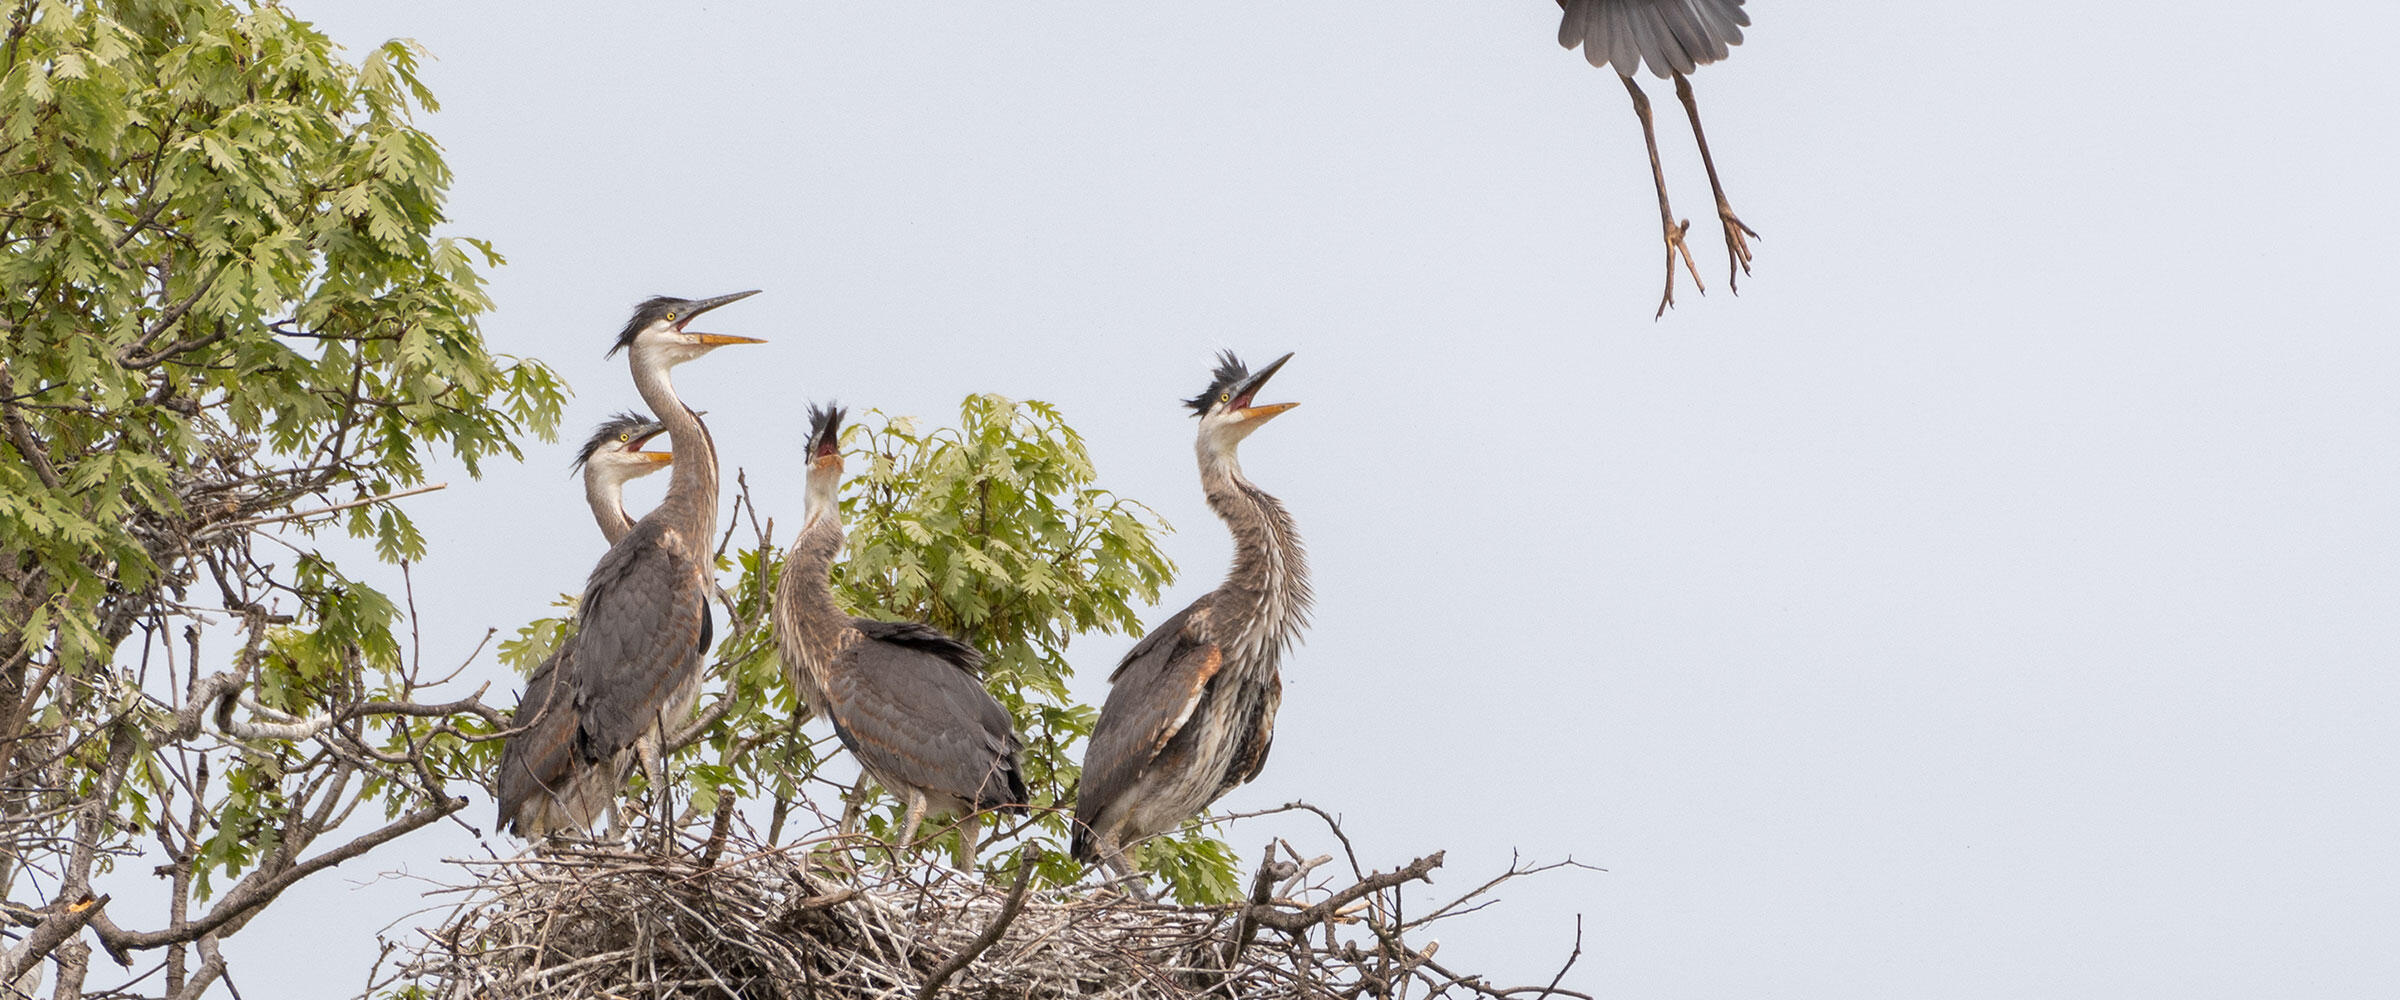 Great Blue Heron chicks beg for food in their nest as their parent lands.